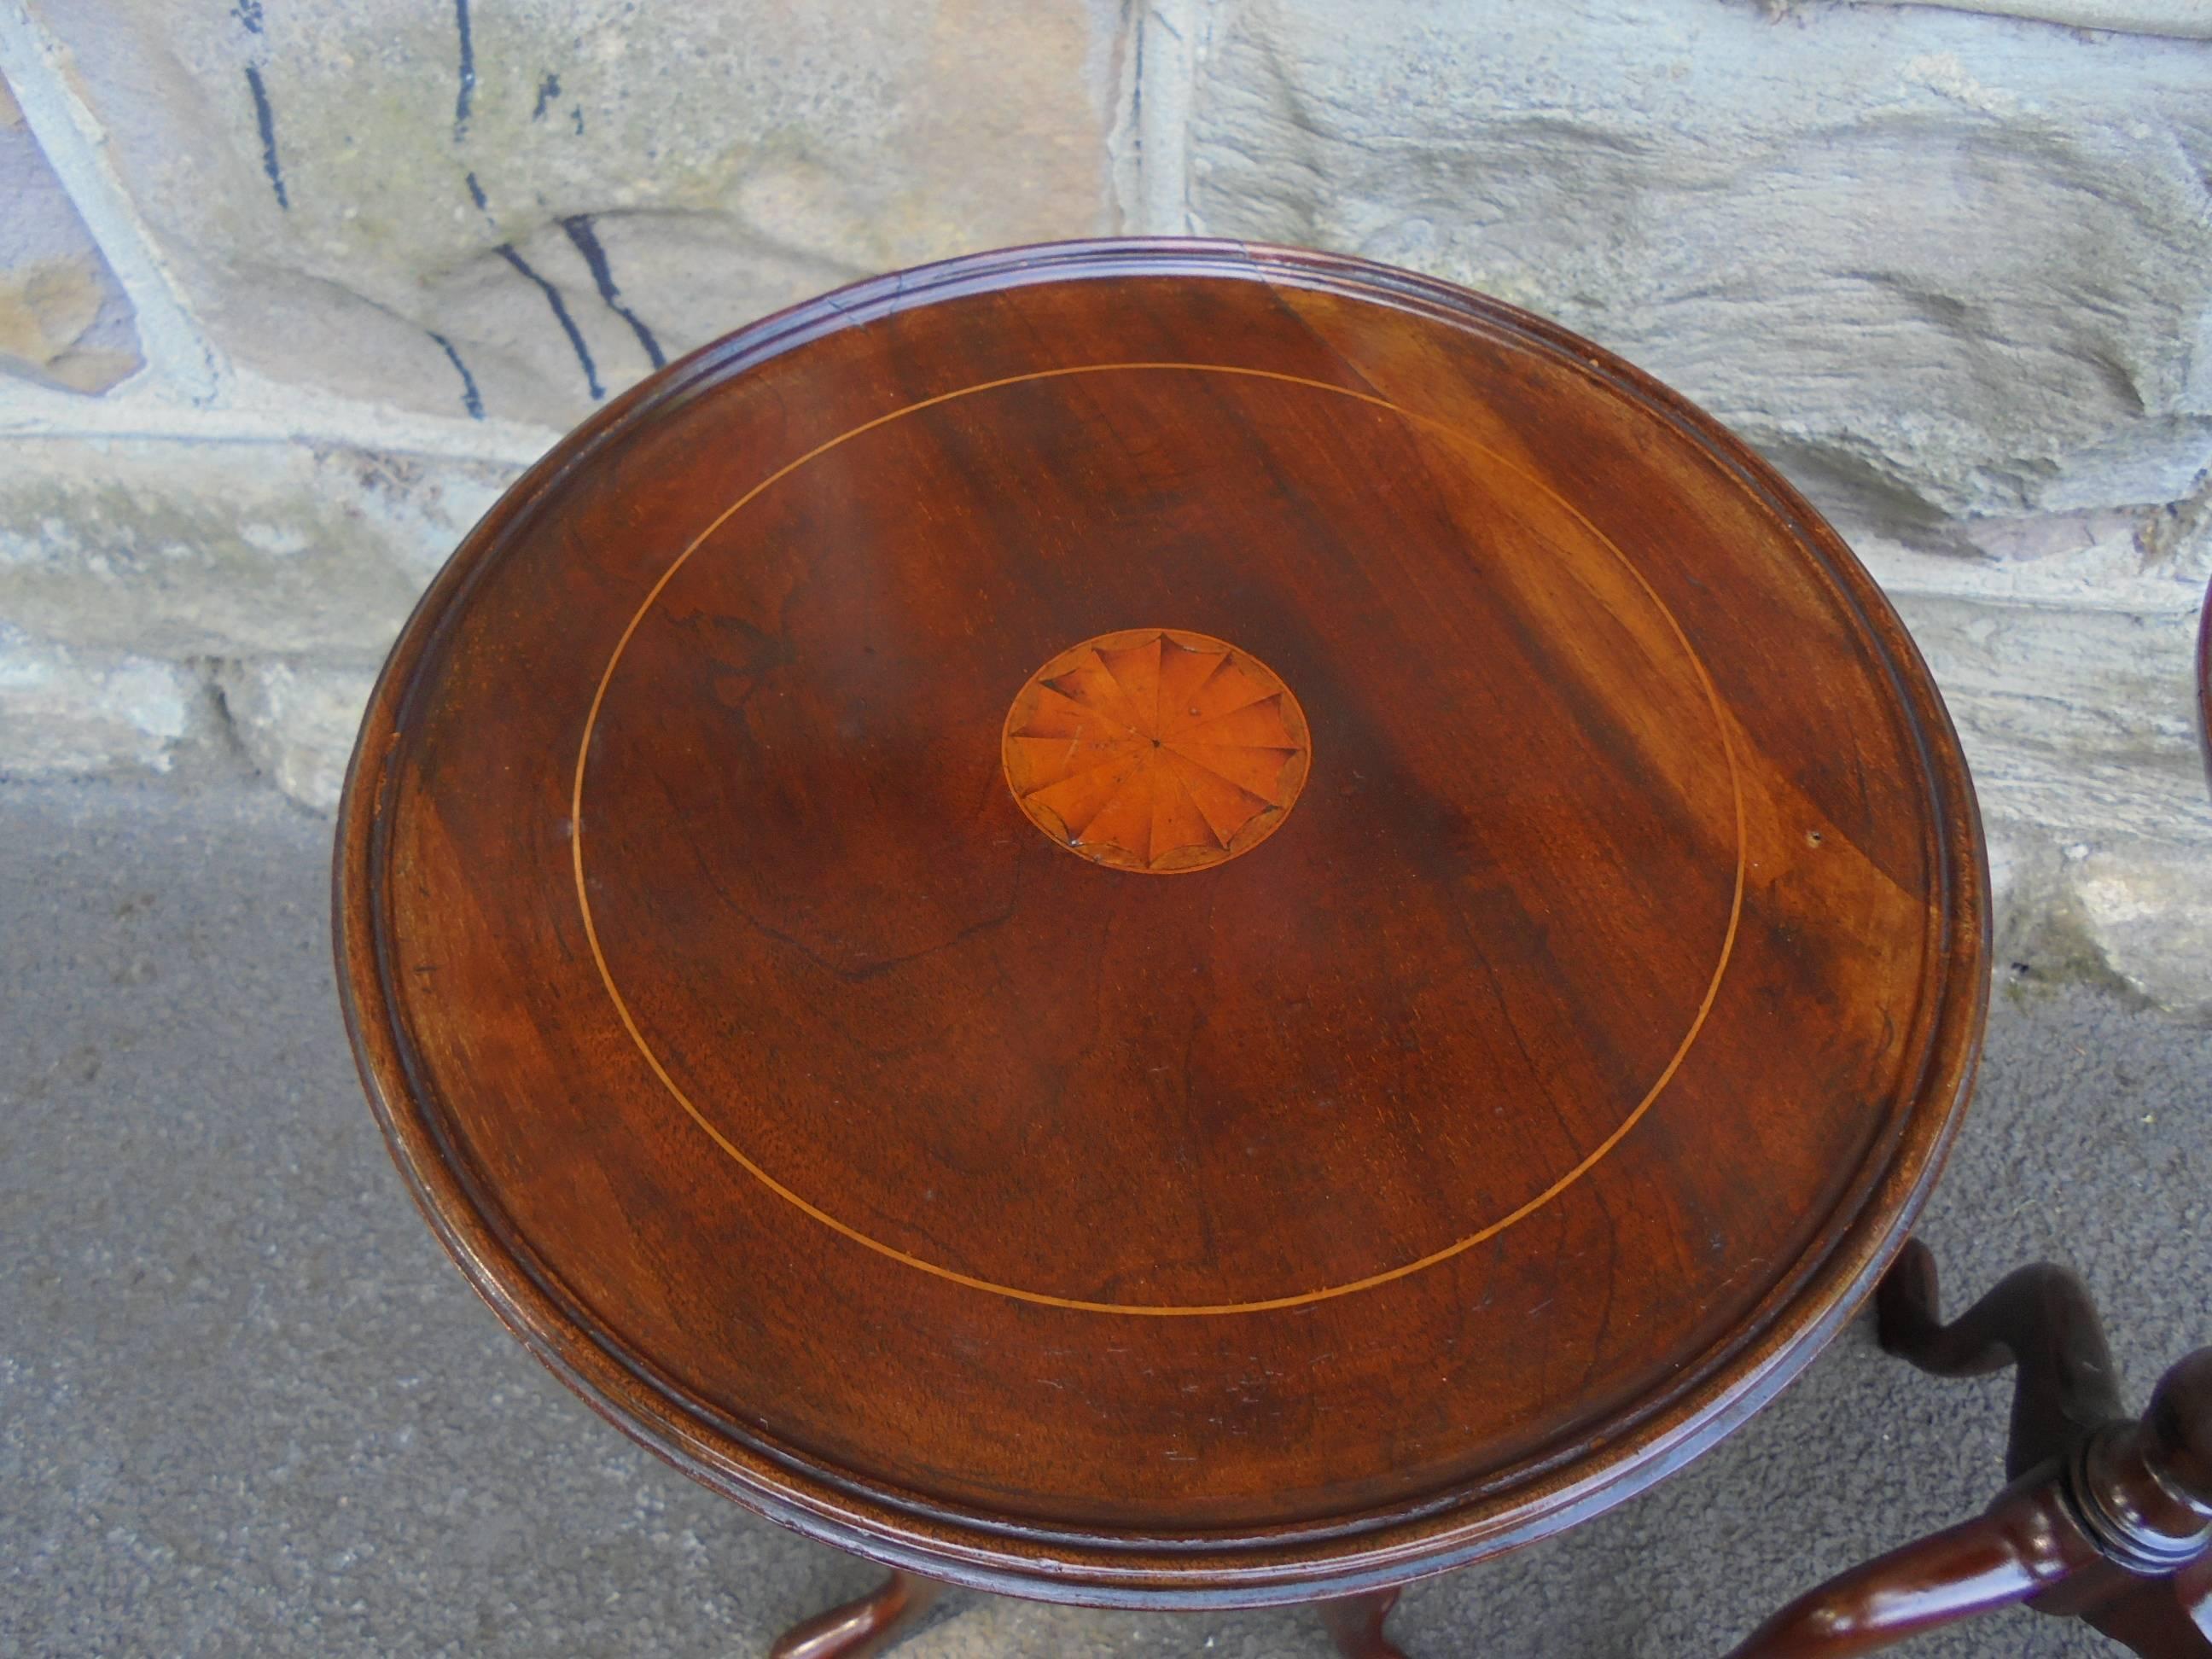 Offered for sale is this good quality pair of antique mahogany wine tables

Dating circa 1910. Round mahogany dished tops, with inlaid paterae to the centre. Turned column and three splayed legs.

Offered in good clean original condition. Good